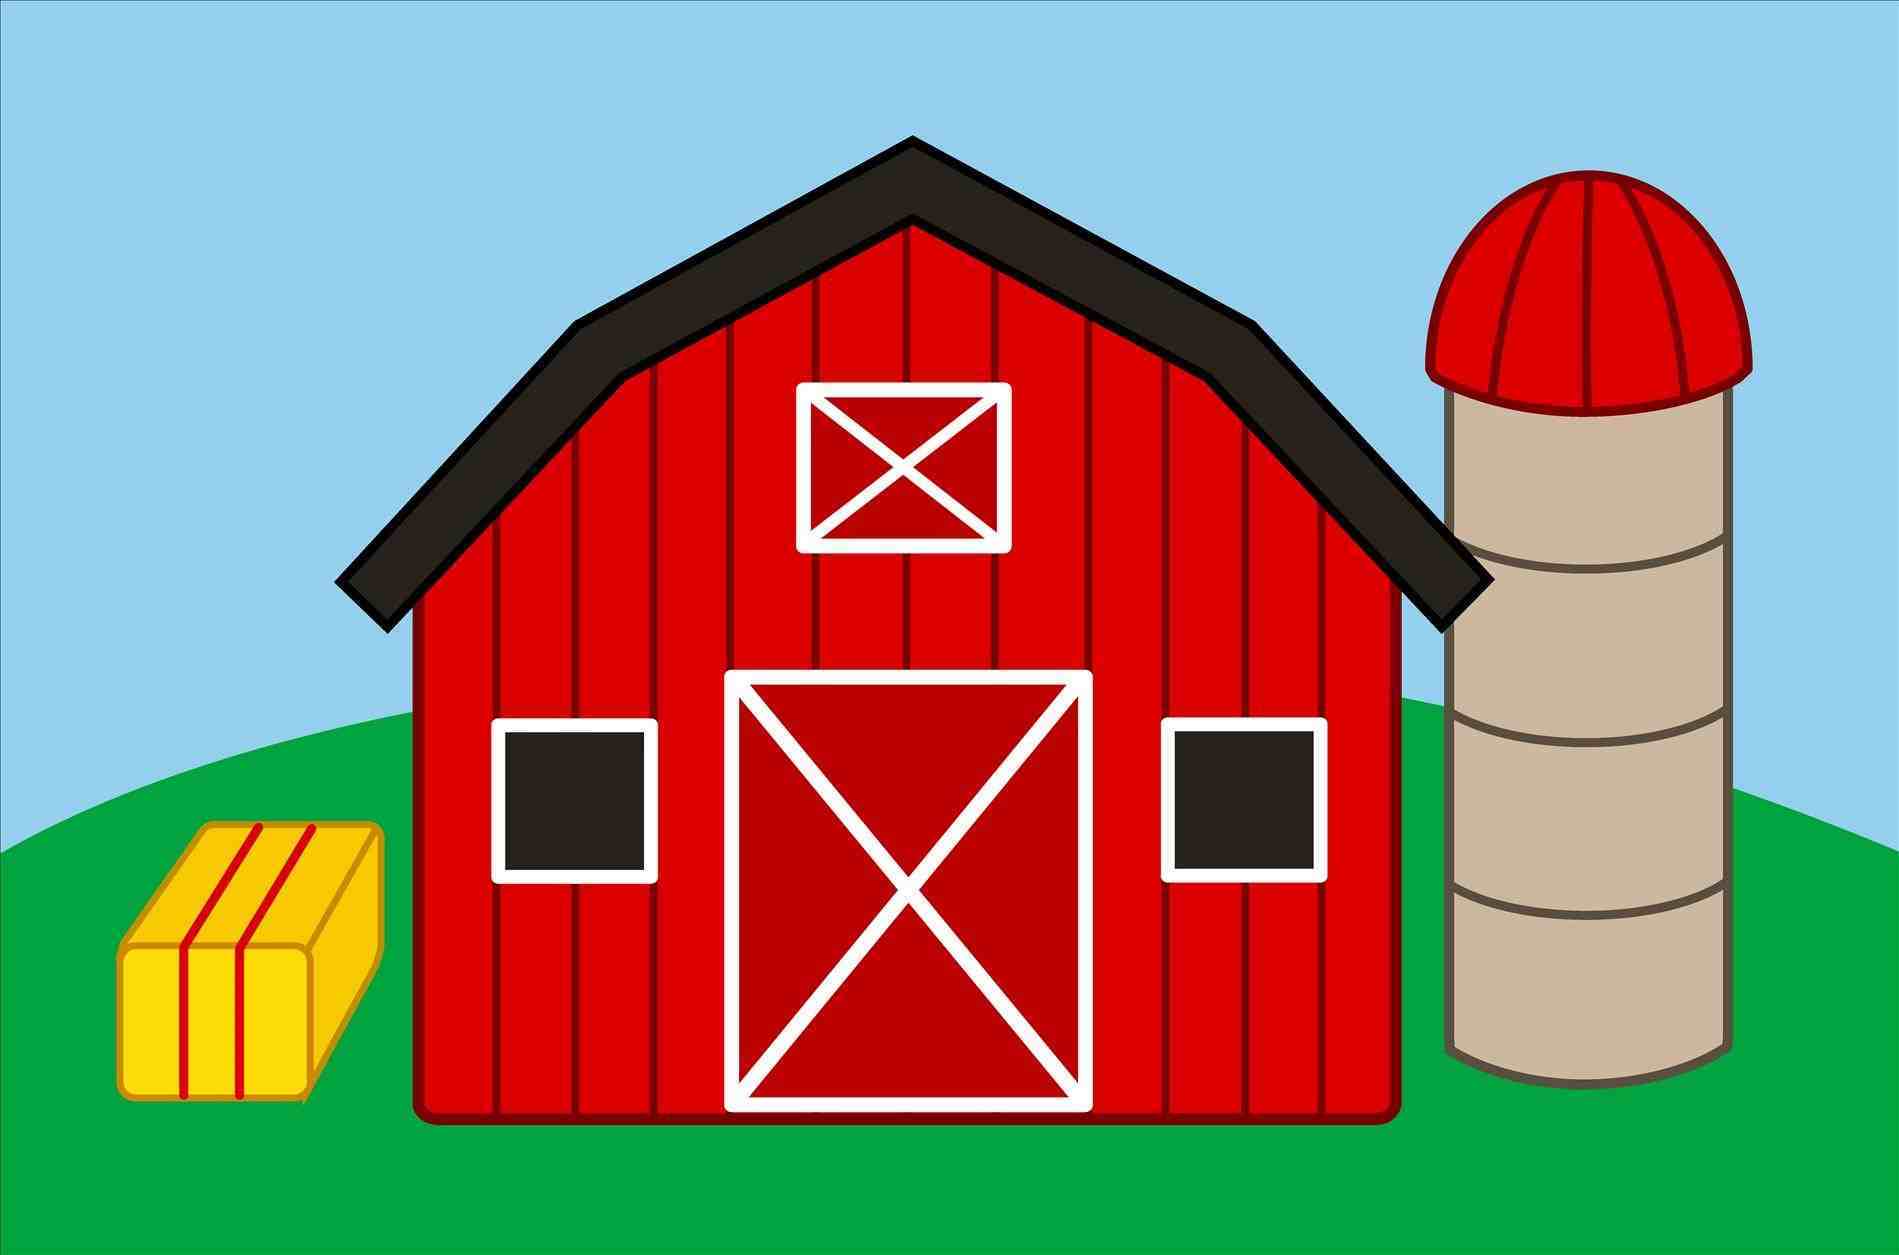 Great How Do You Draw A Barn of all time Check it out now 